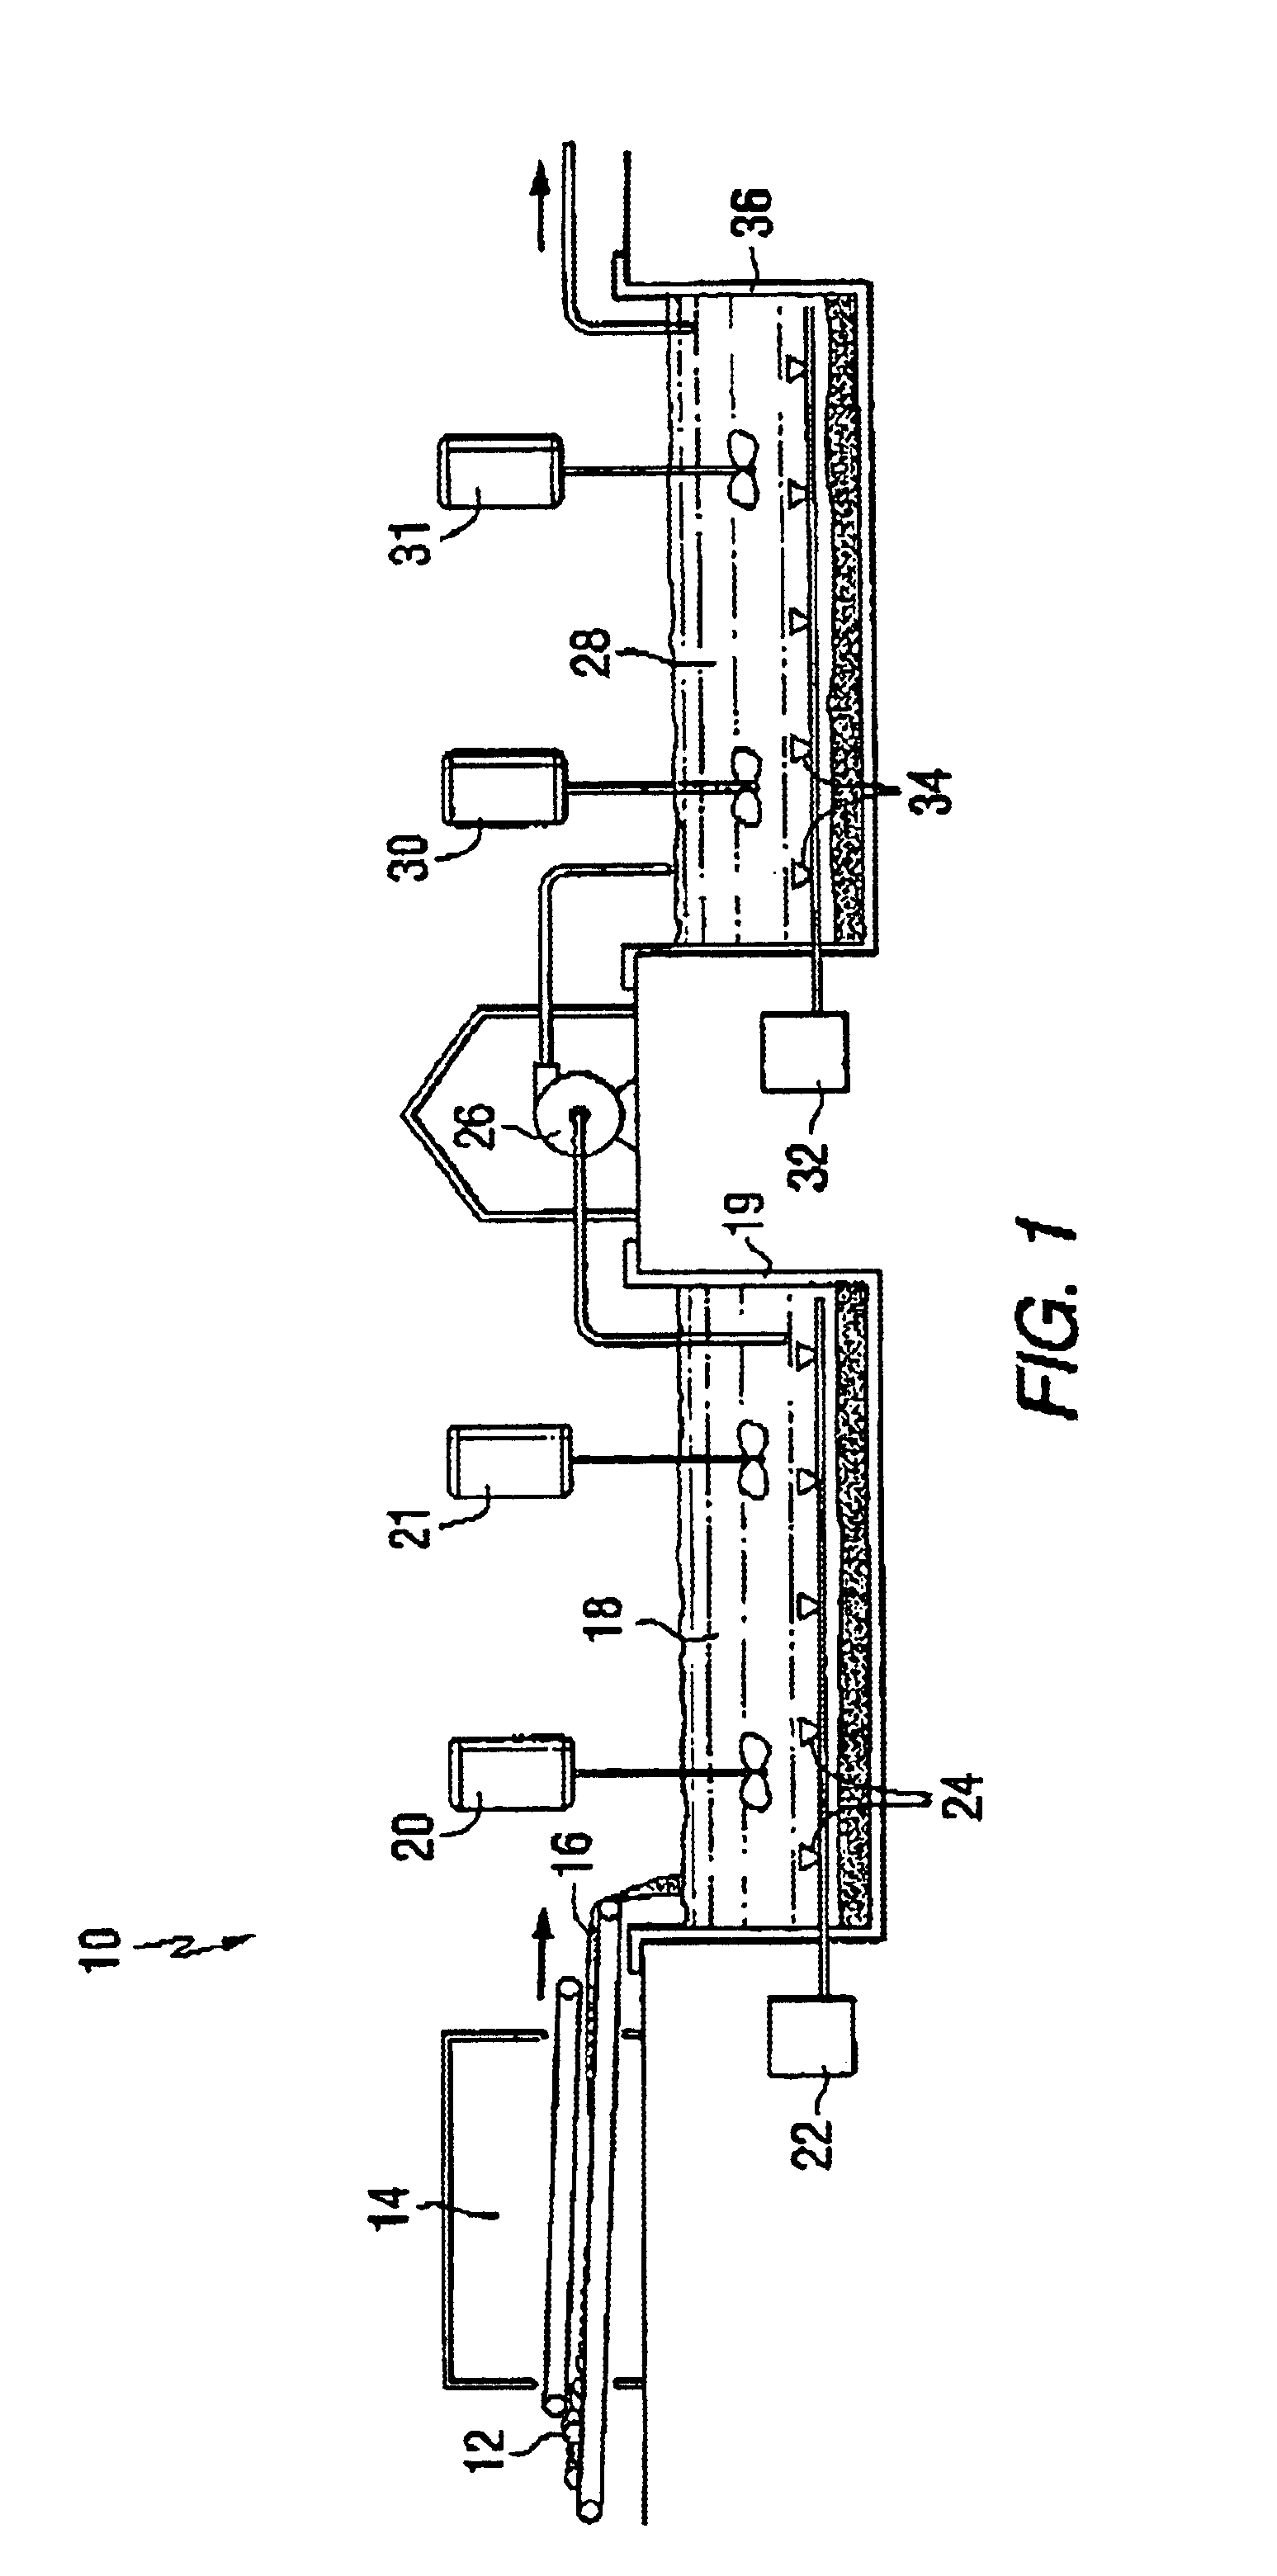 Method and apparatus for recovery of metals with hydrocarbon-utilizing bacteria